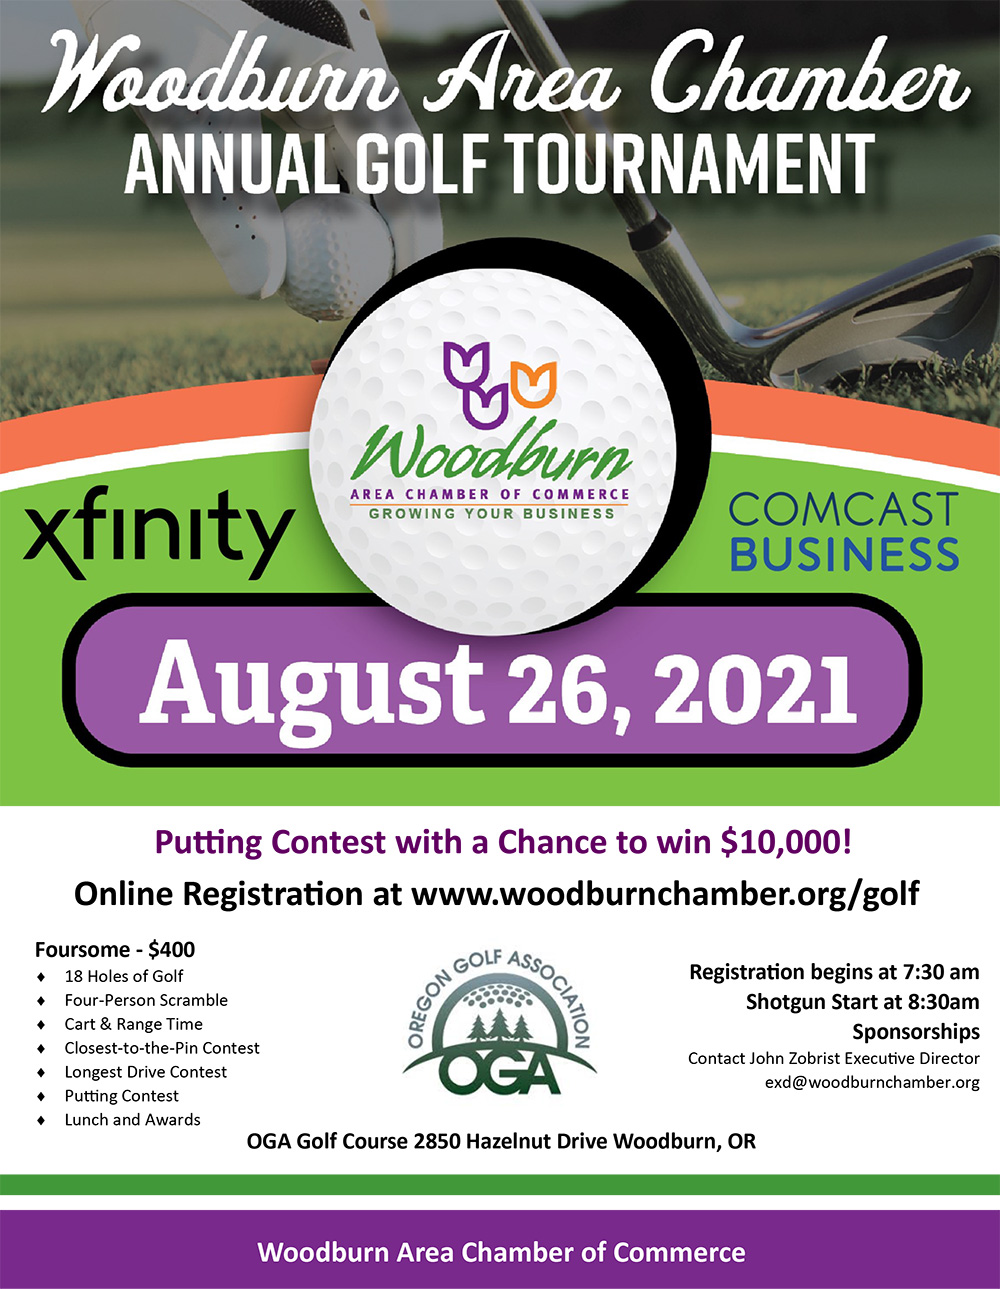 Woodburn Area Chamber of Commerce Golf Tournament 2021 Flyer